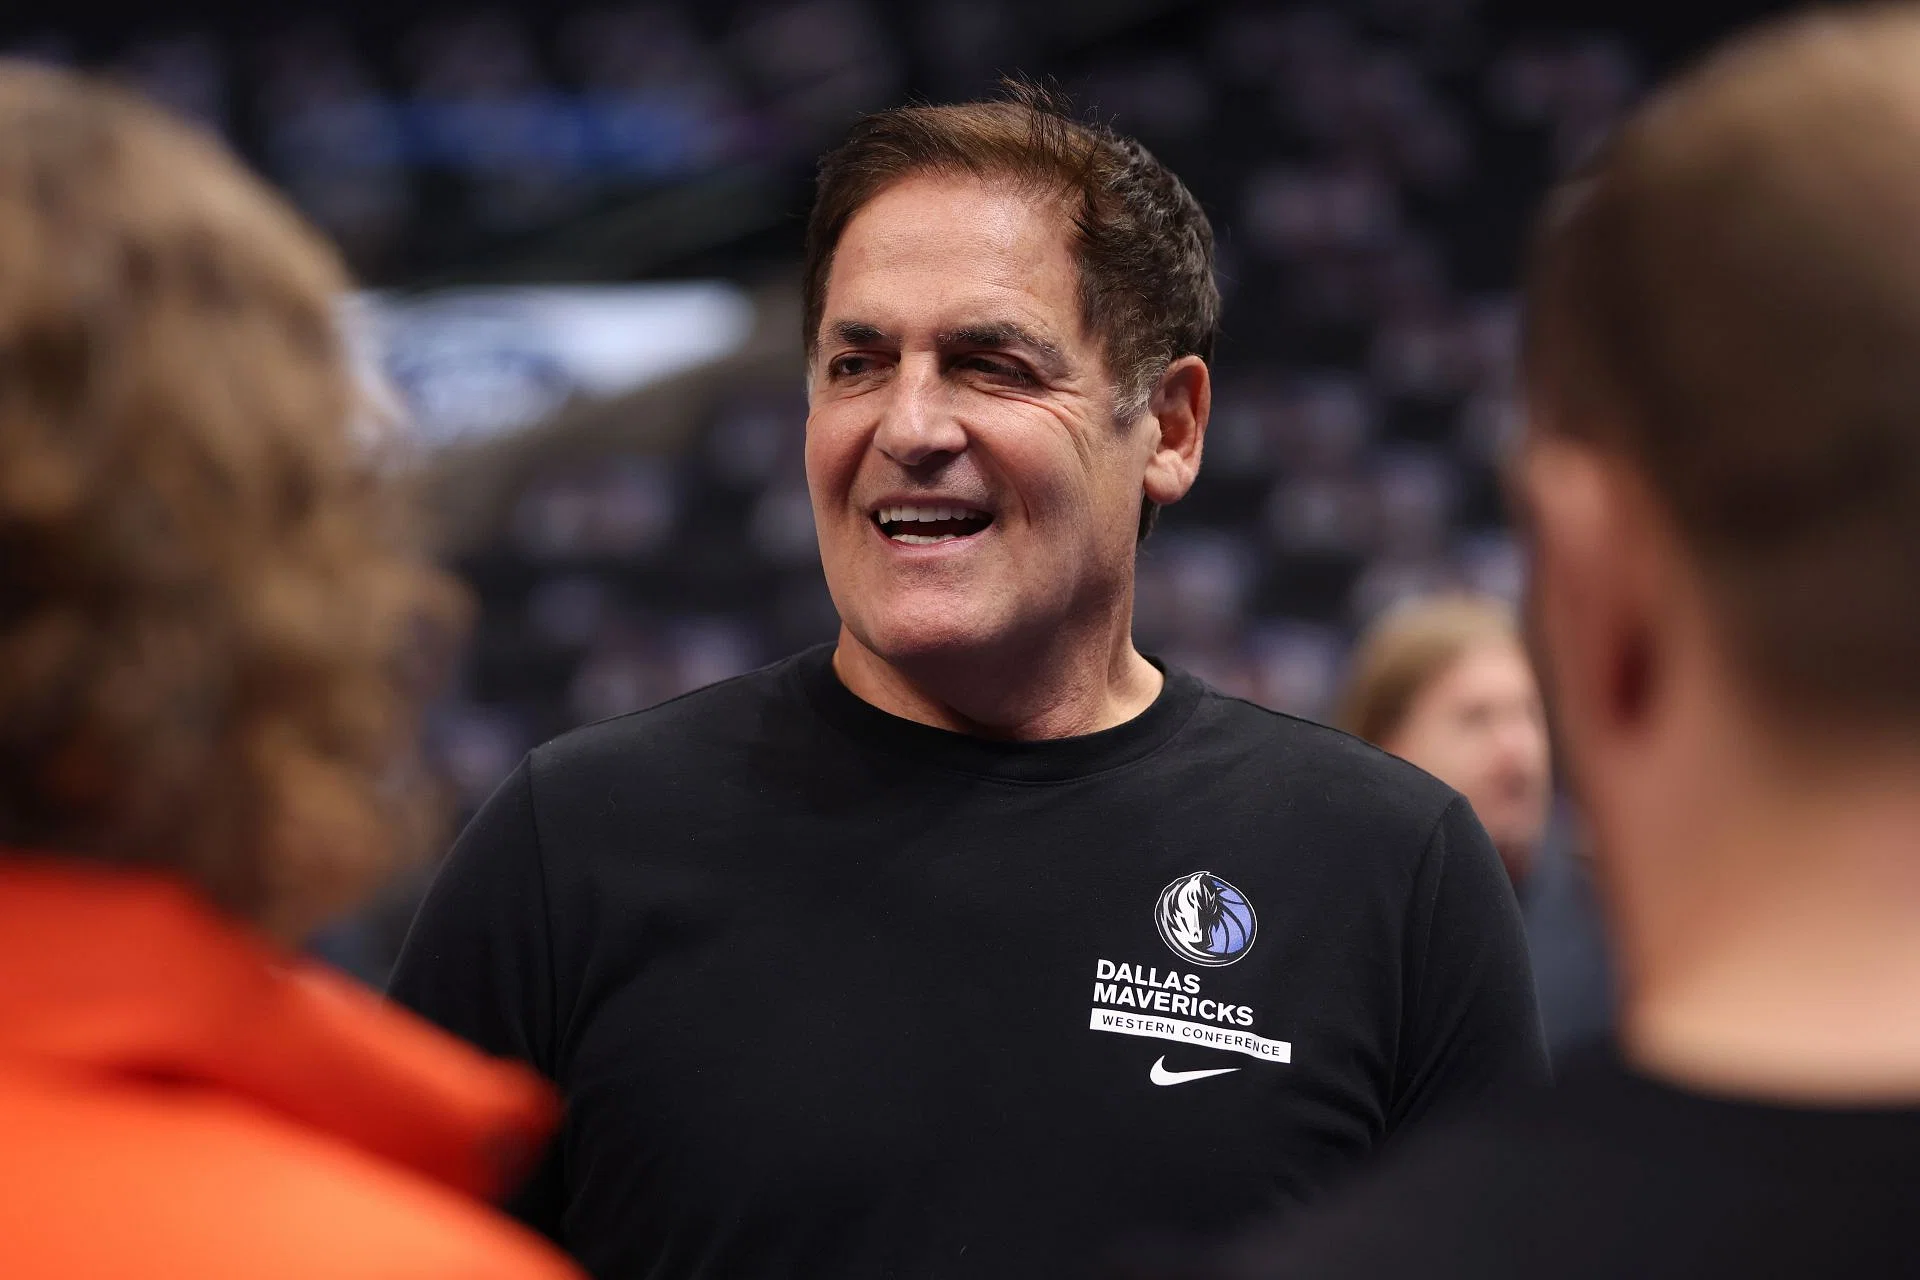 How Mark Cuban Turns His Team Into Millionaires A Closer Look at His Generous Business Moves---